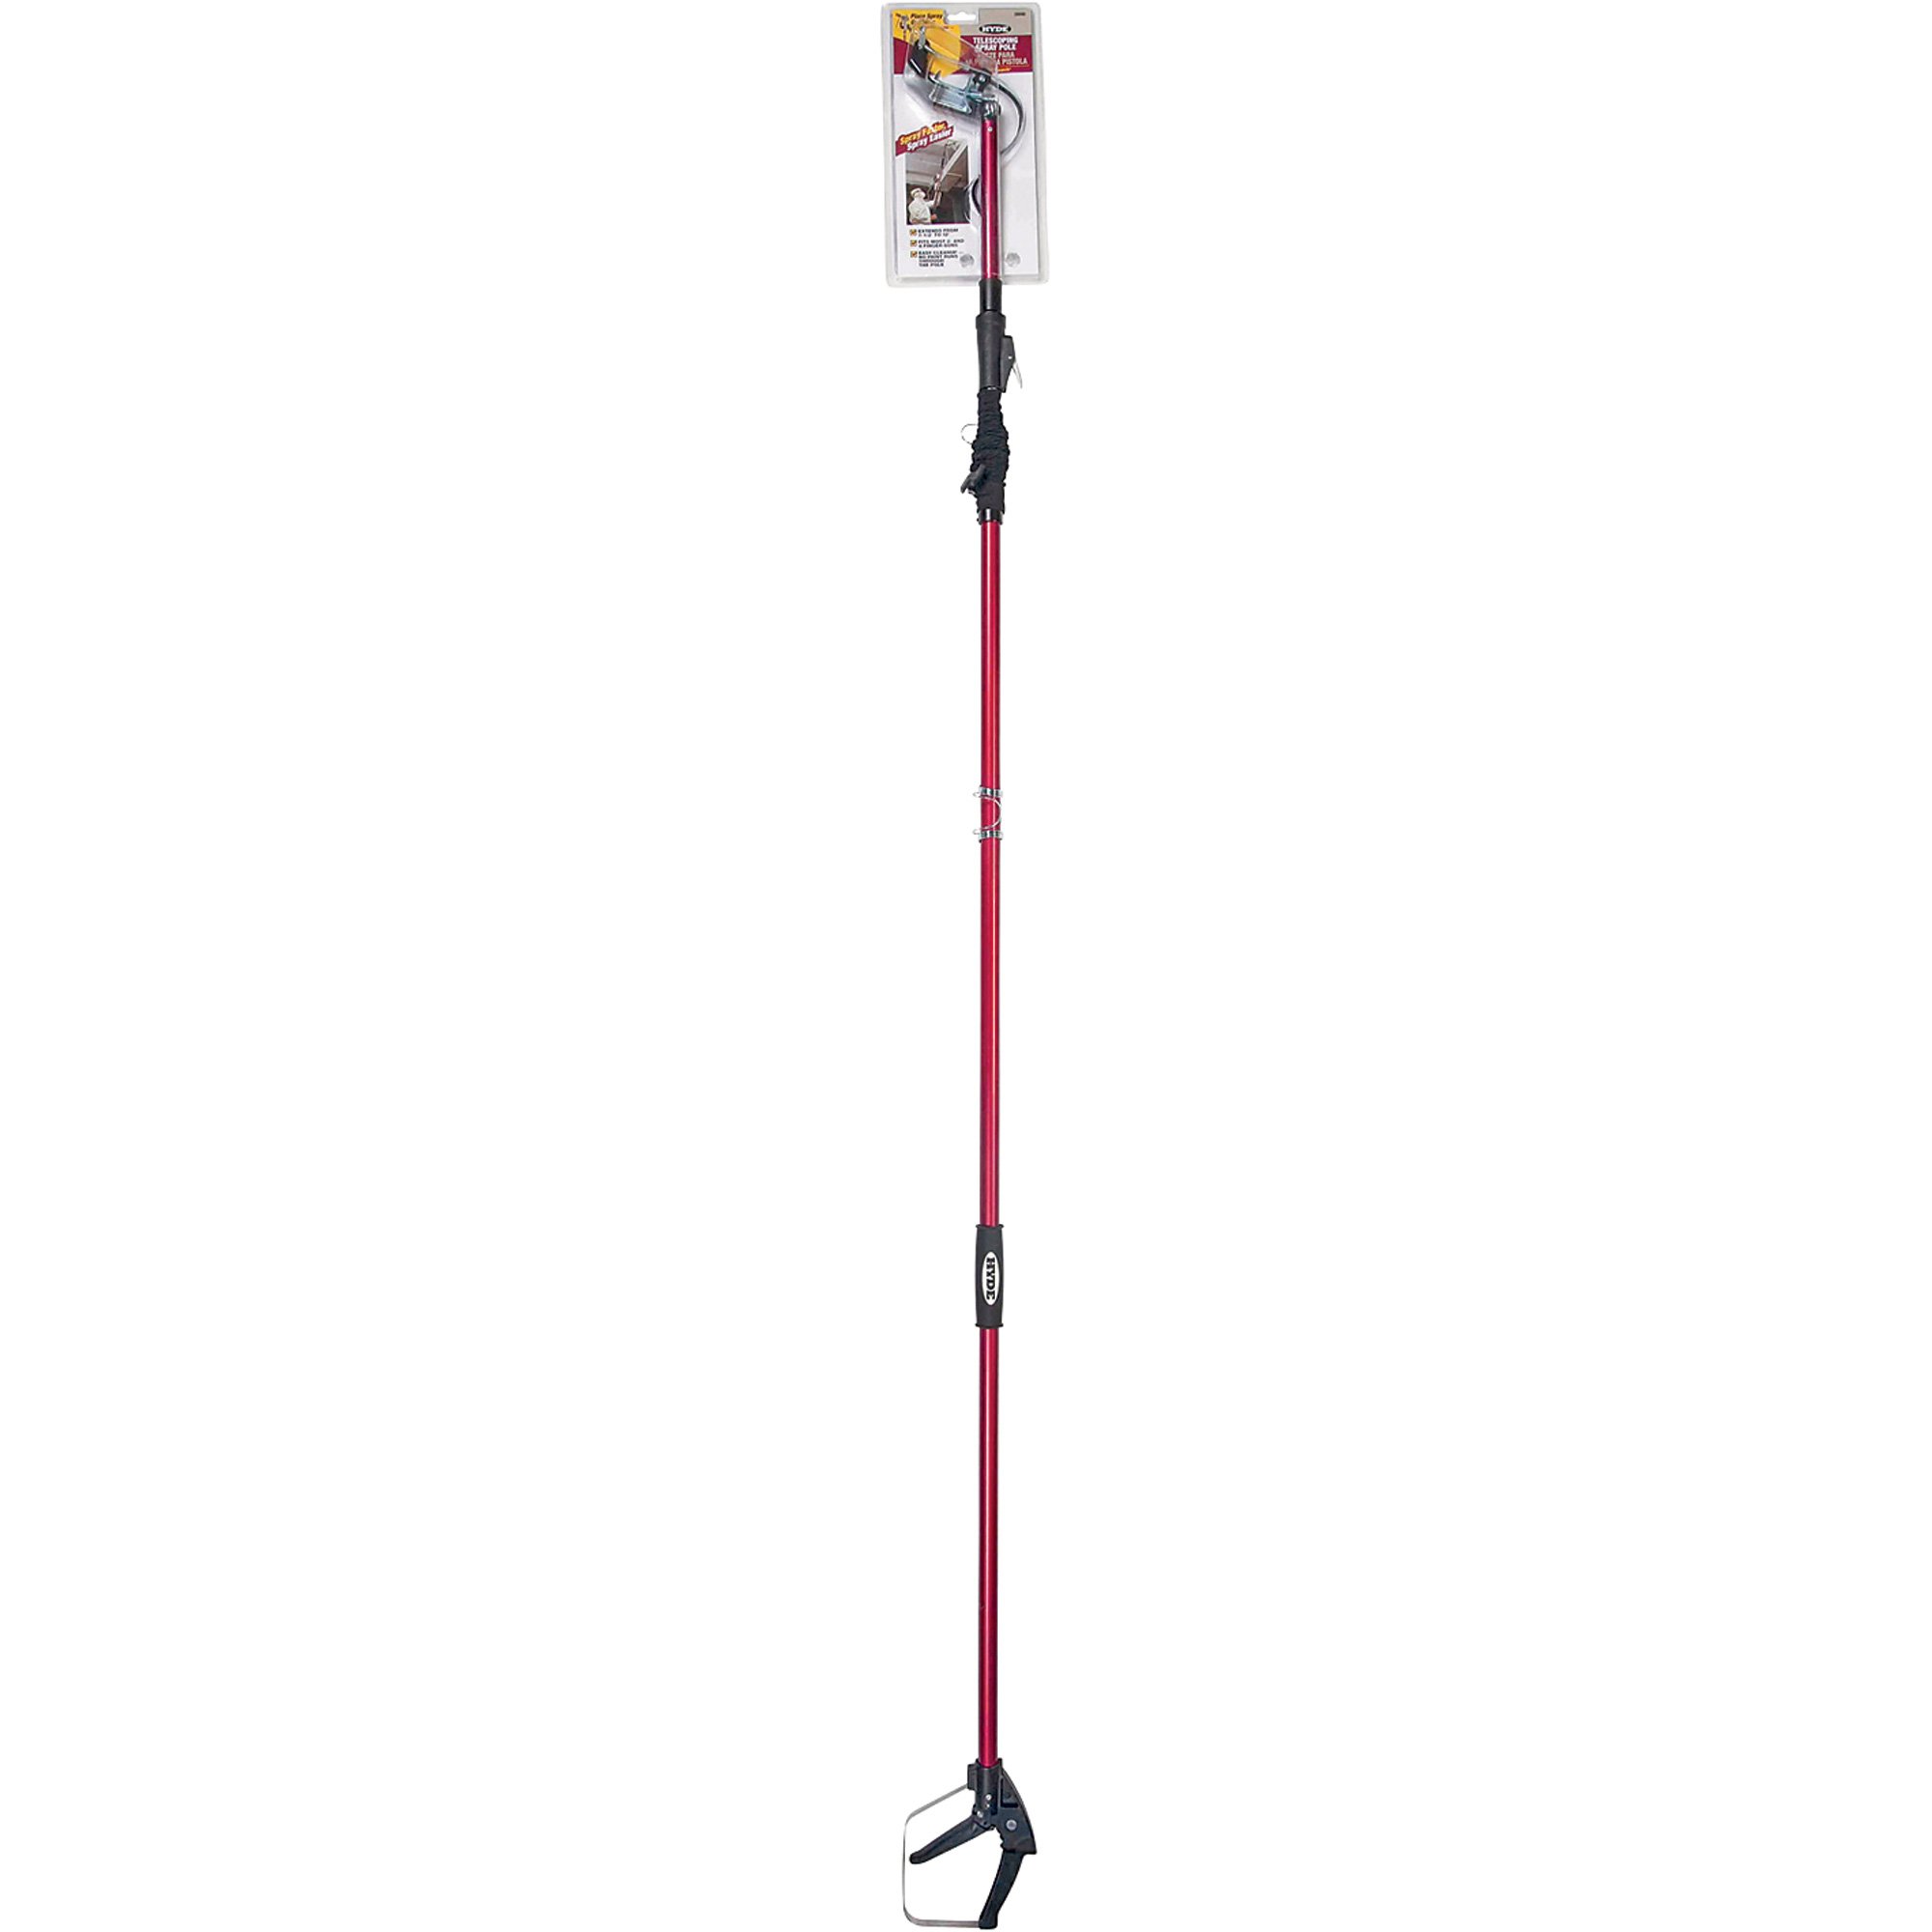 7-24 ft Telescopic Extension Pole, Insecticide Sprayer